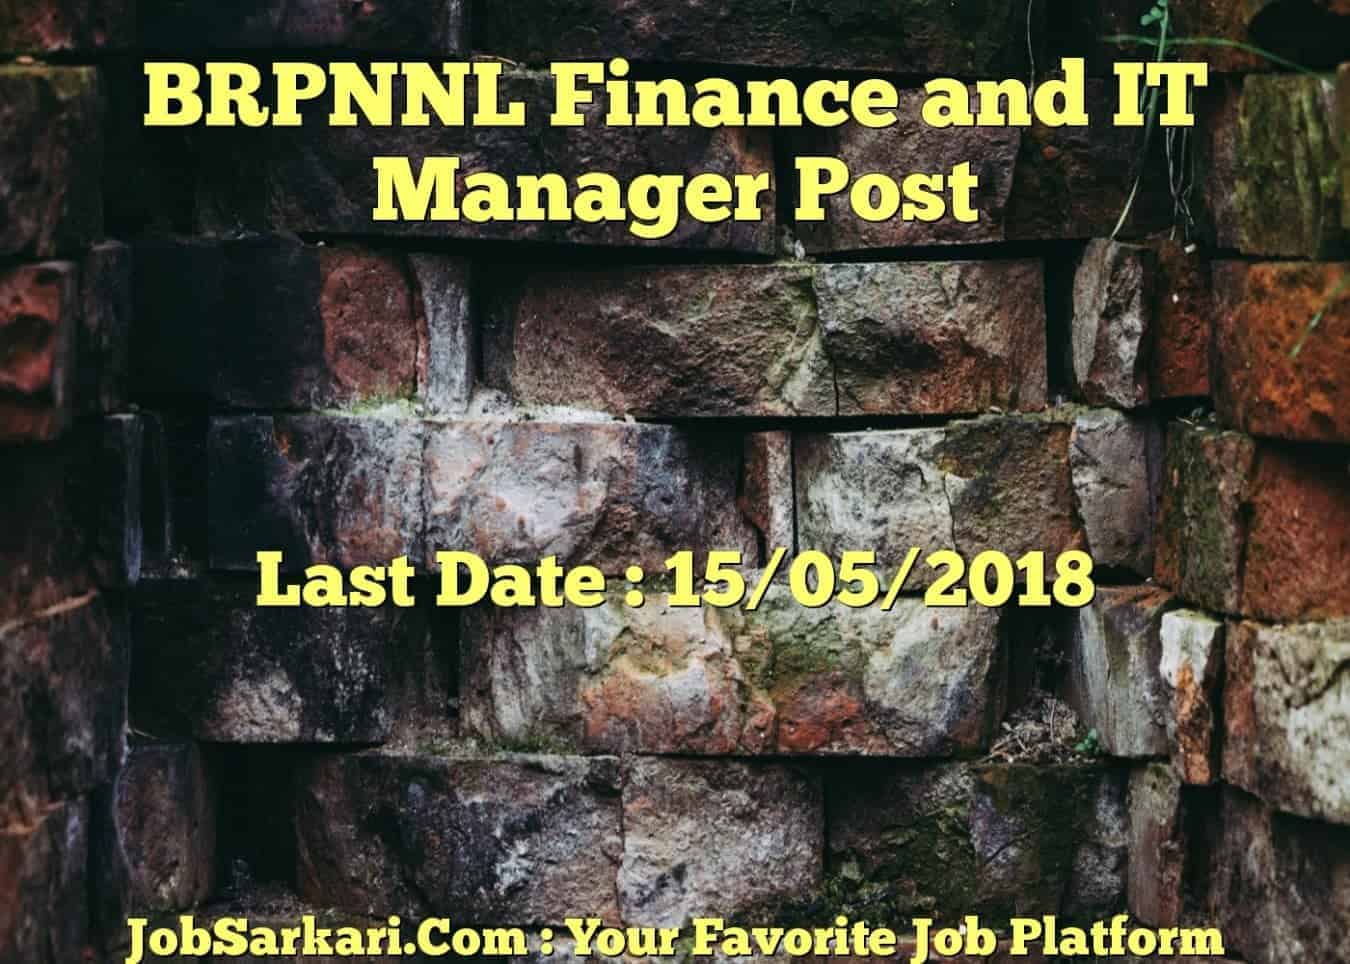 BRPNNL Finance and IT Manager Post